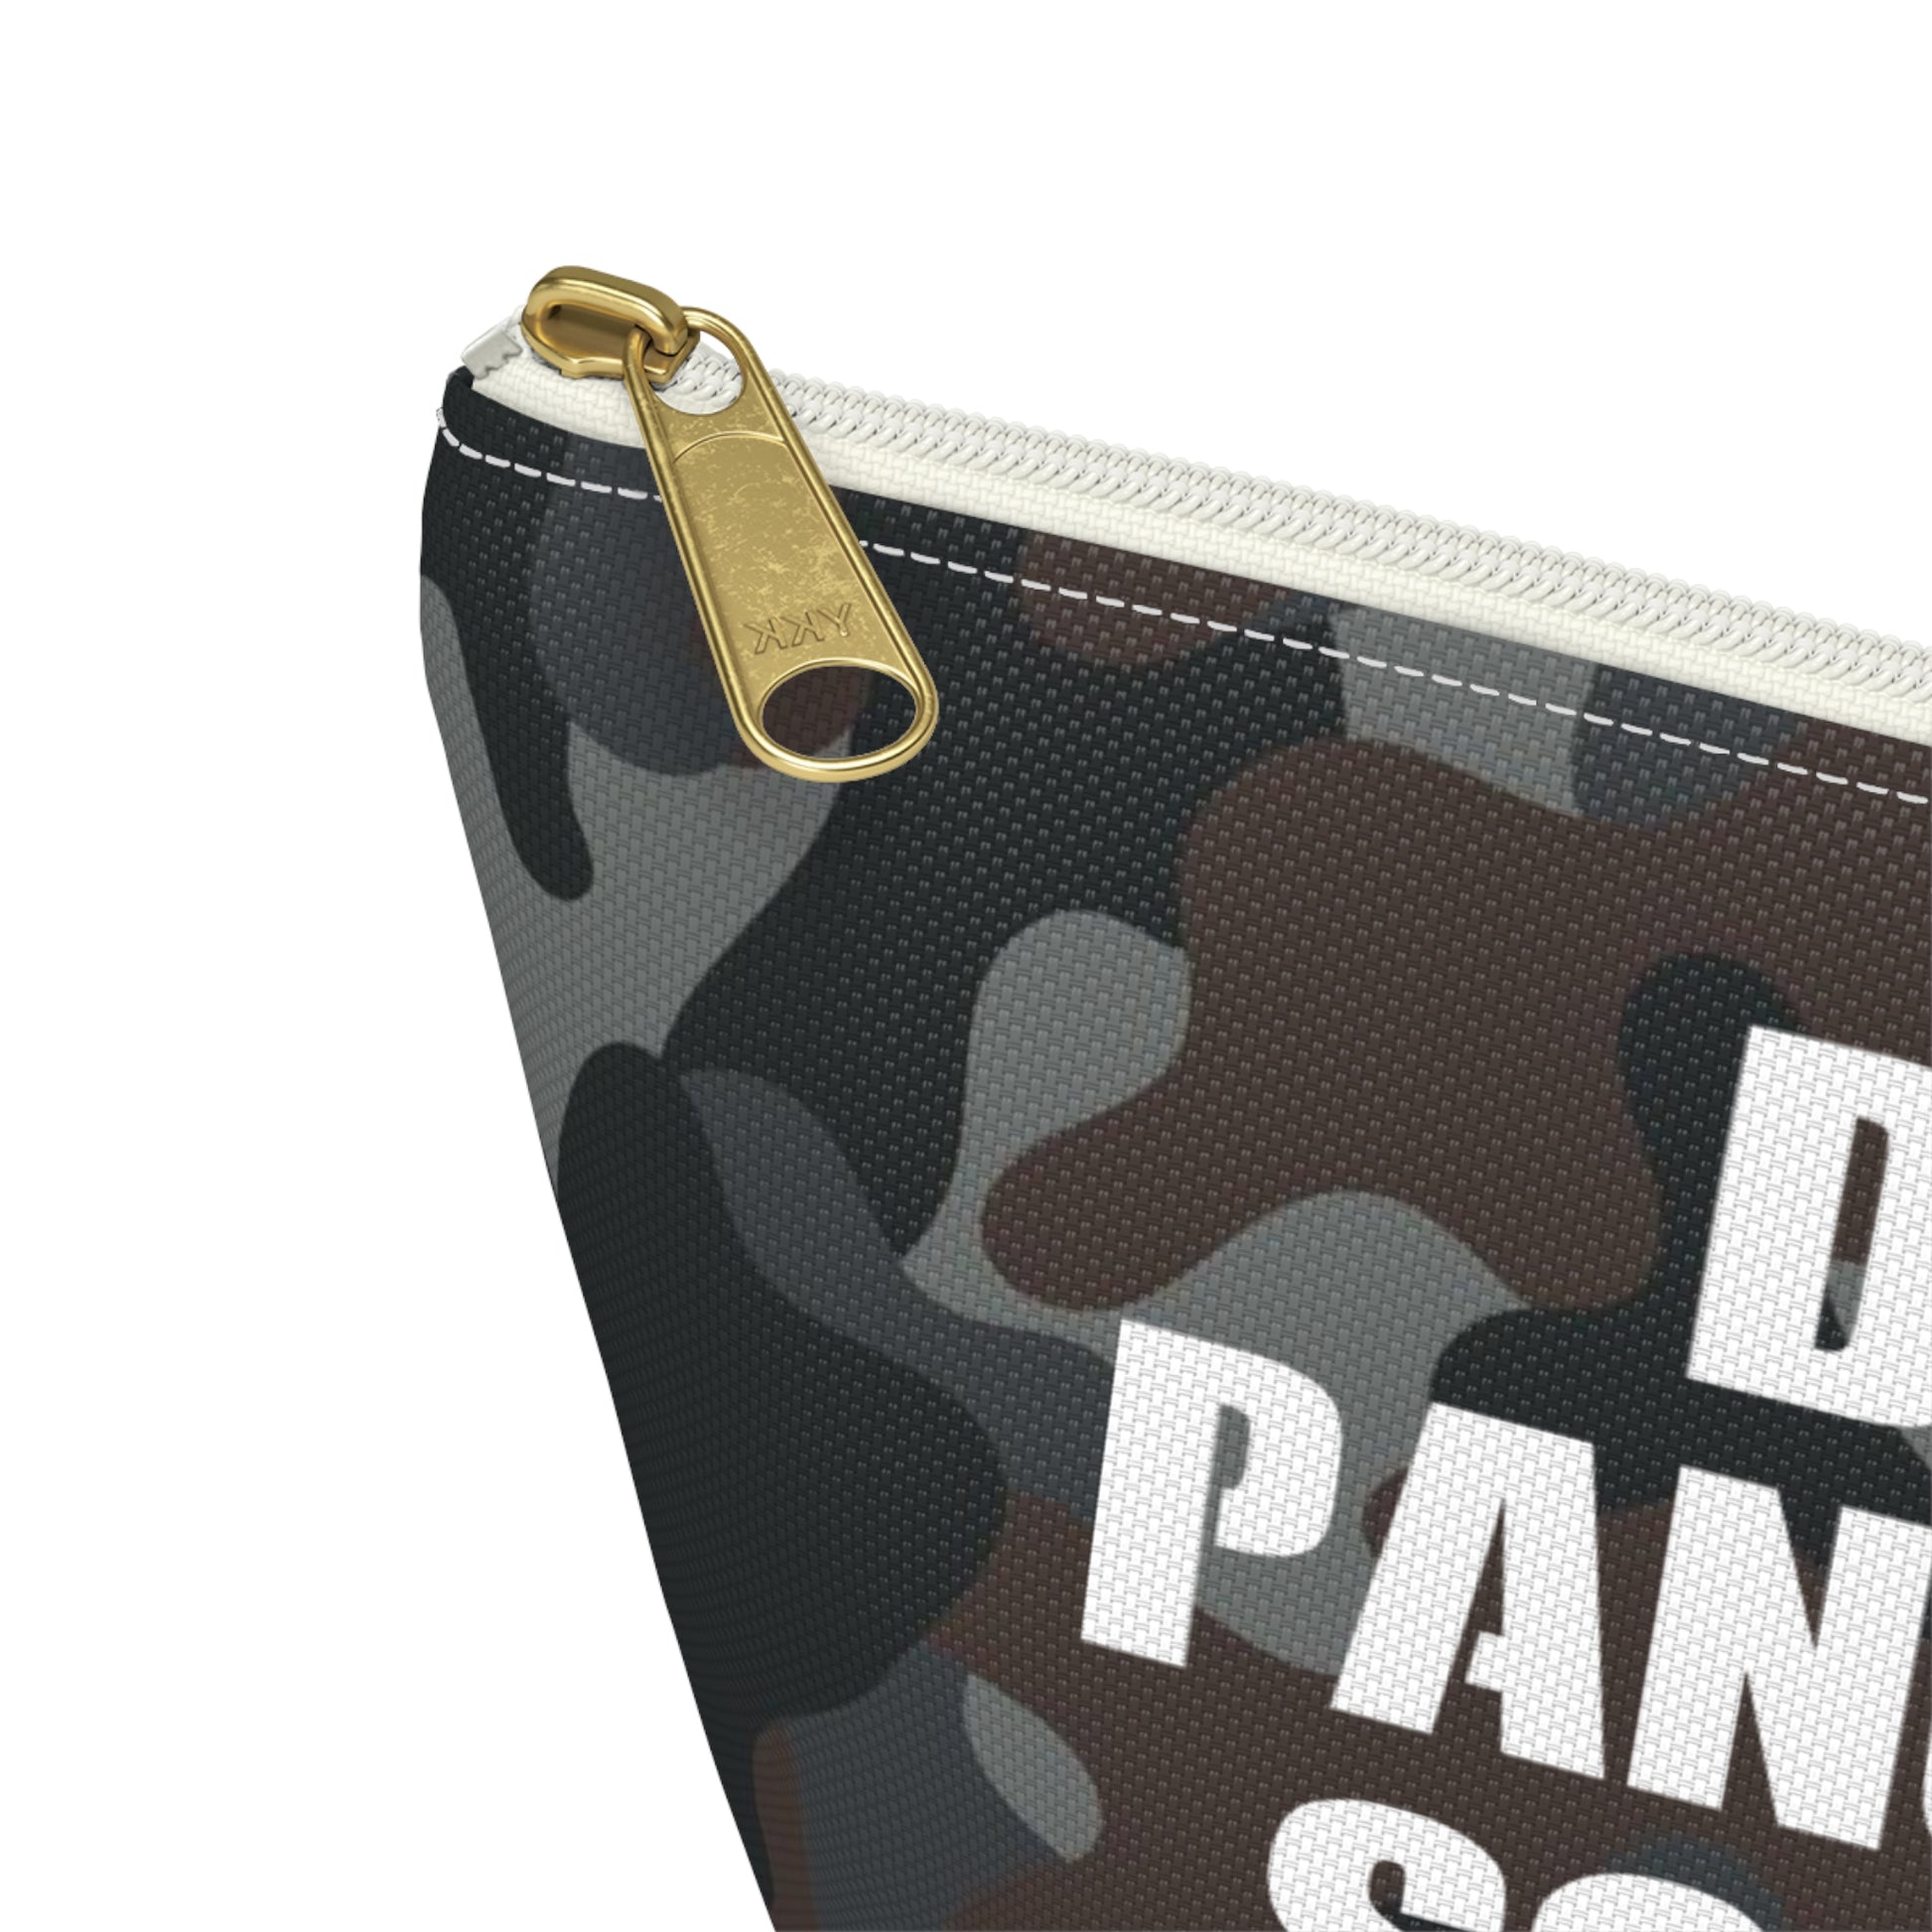 Dead Pancreas Society Bag, Diabetes Fun Diabetic Supply Carrying Case DT1 Gift Camo Accessory Small Large Zipper Pouch w T-bottom Starcove Fashion